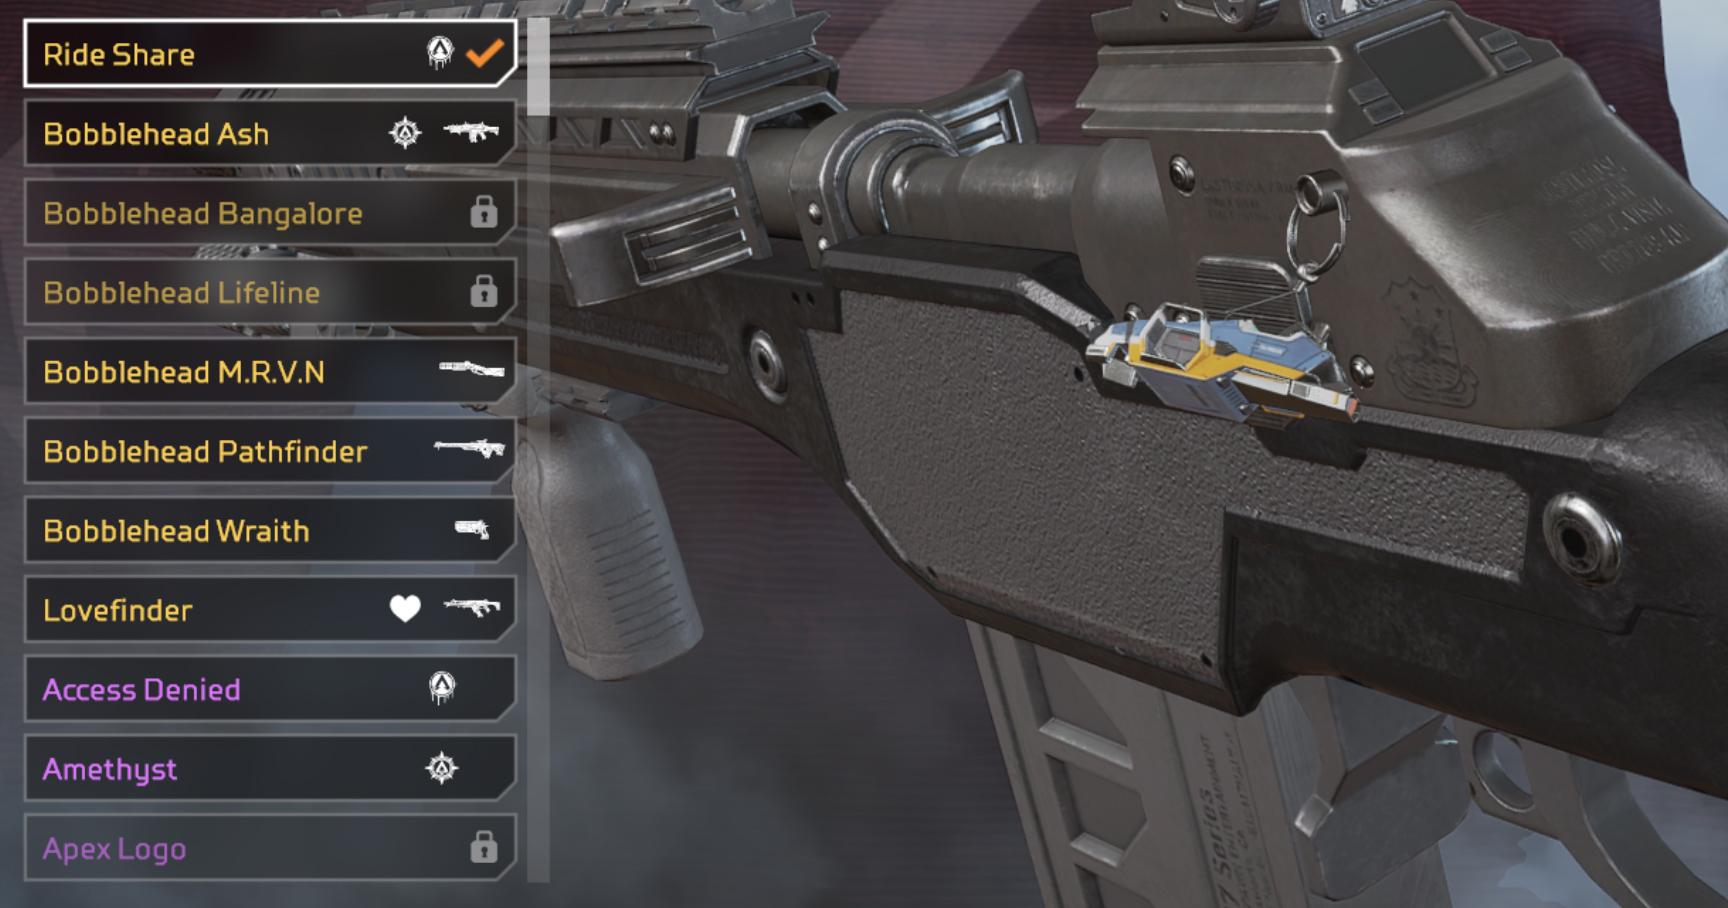 Ride Share weapon charm in Apex Legends